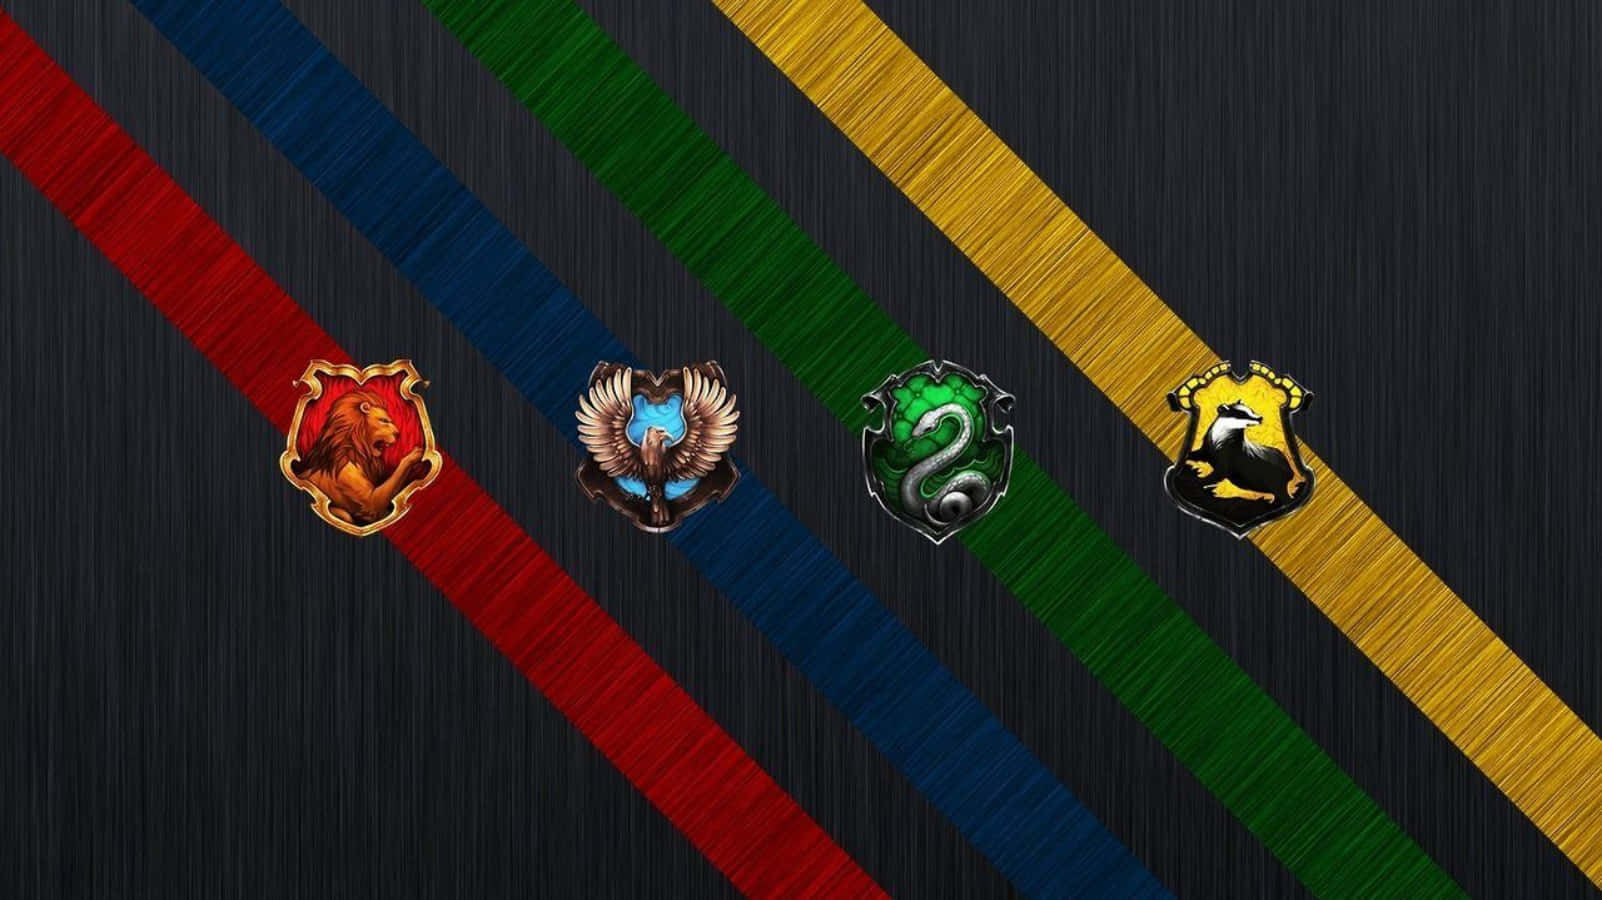 The Hogwarts Houses: Where your story begins" Wallpaper